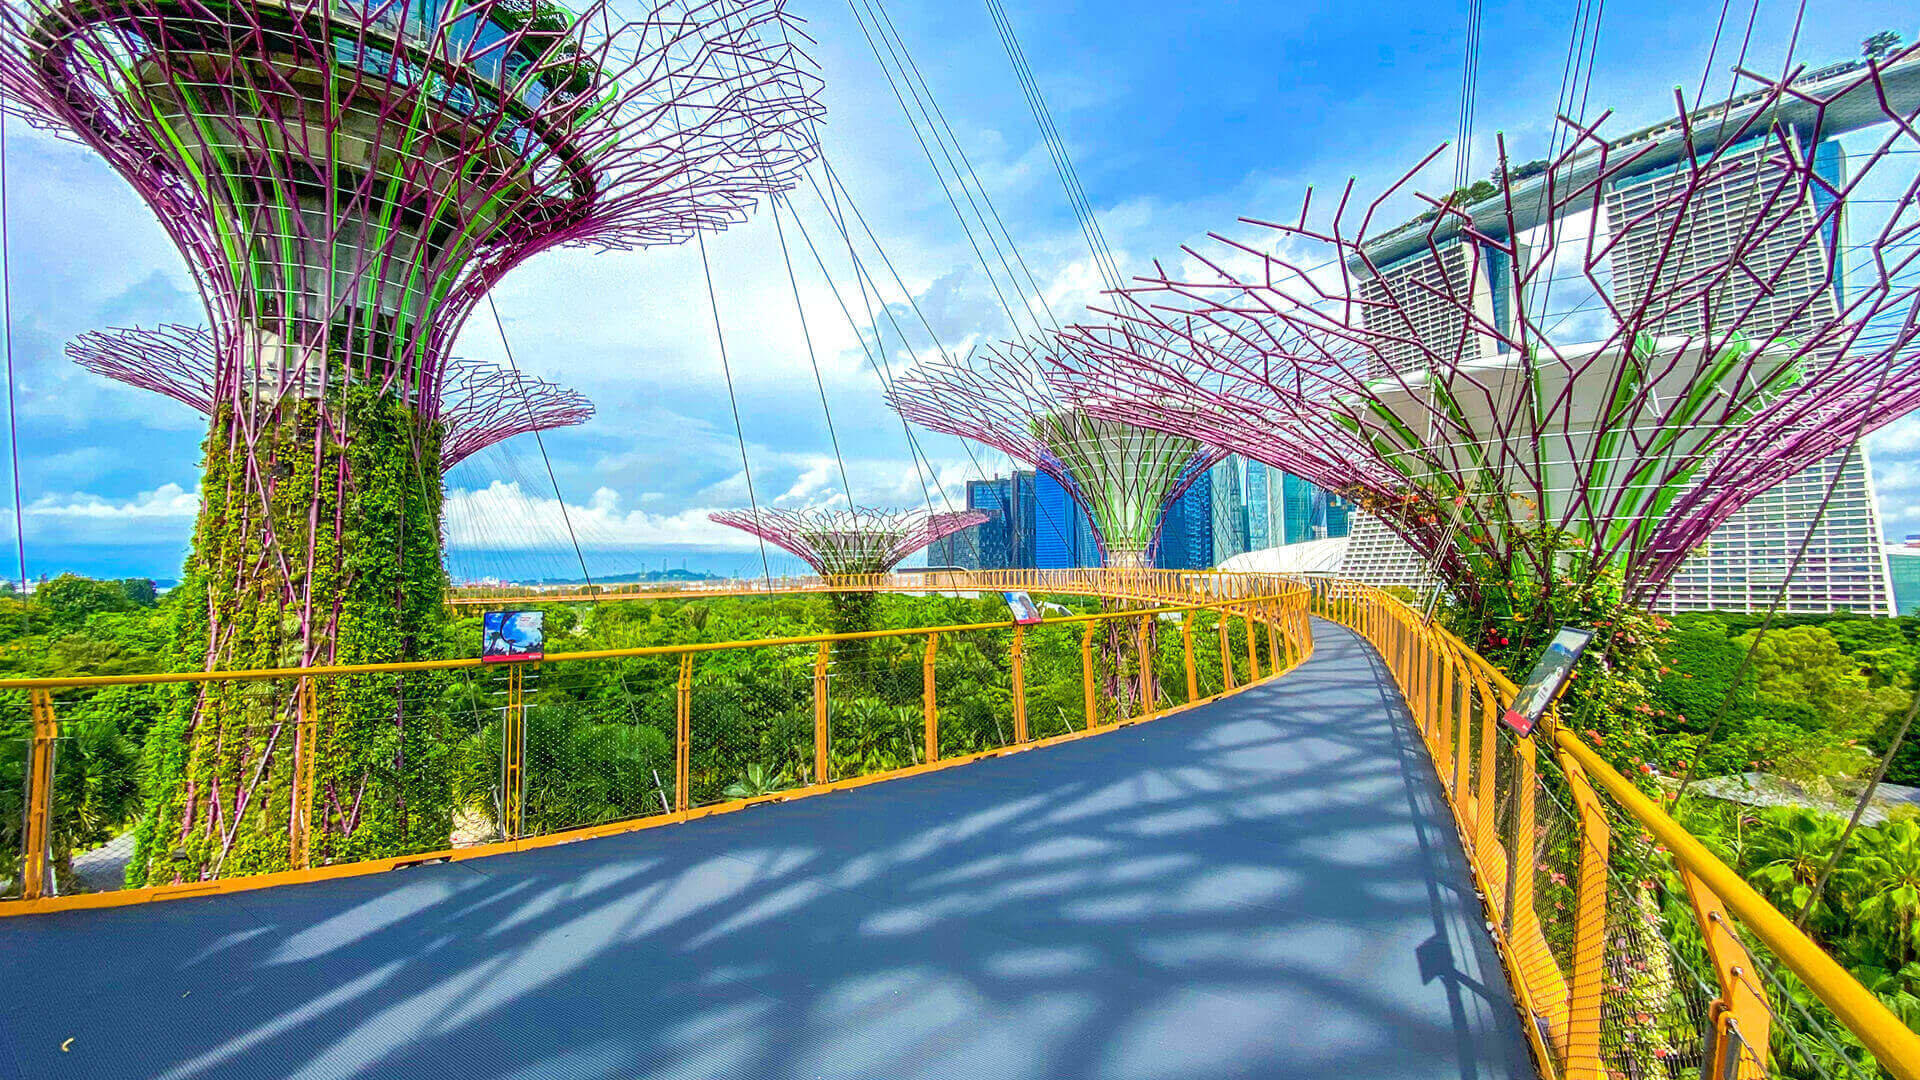 OCBC Skyway- Gardens By the Bay Overview